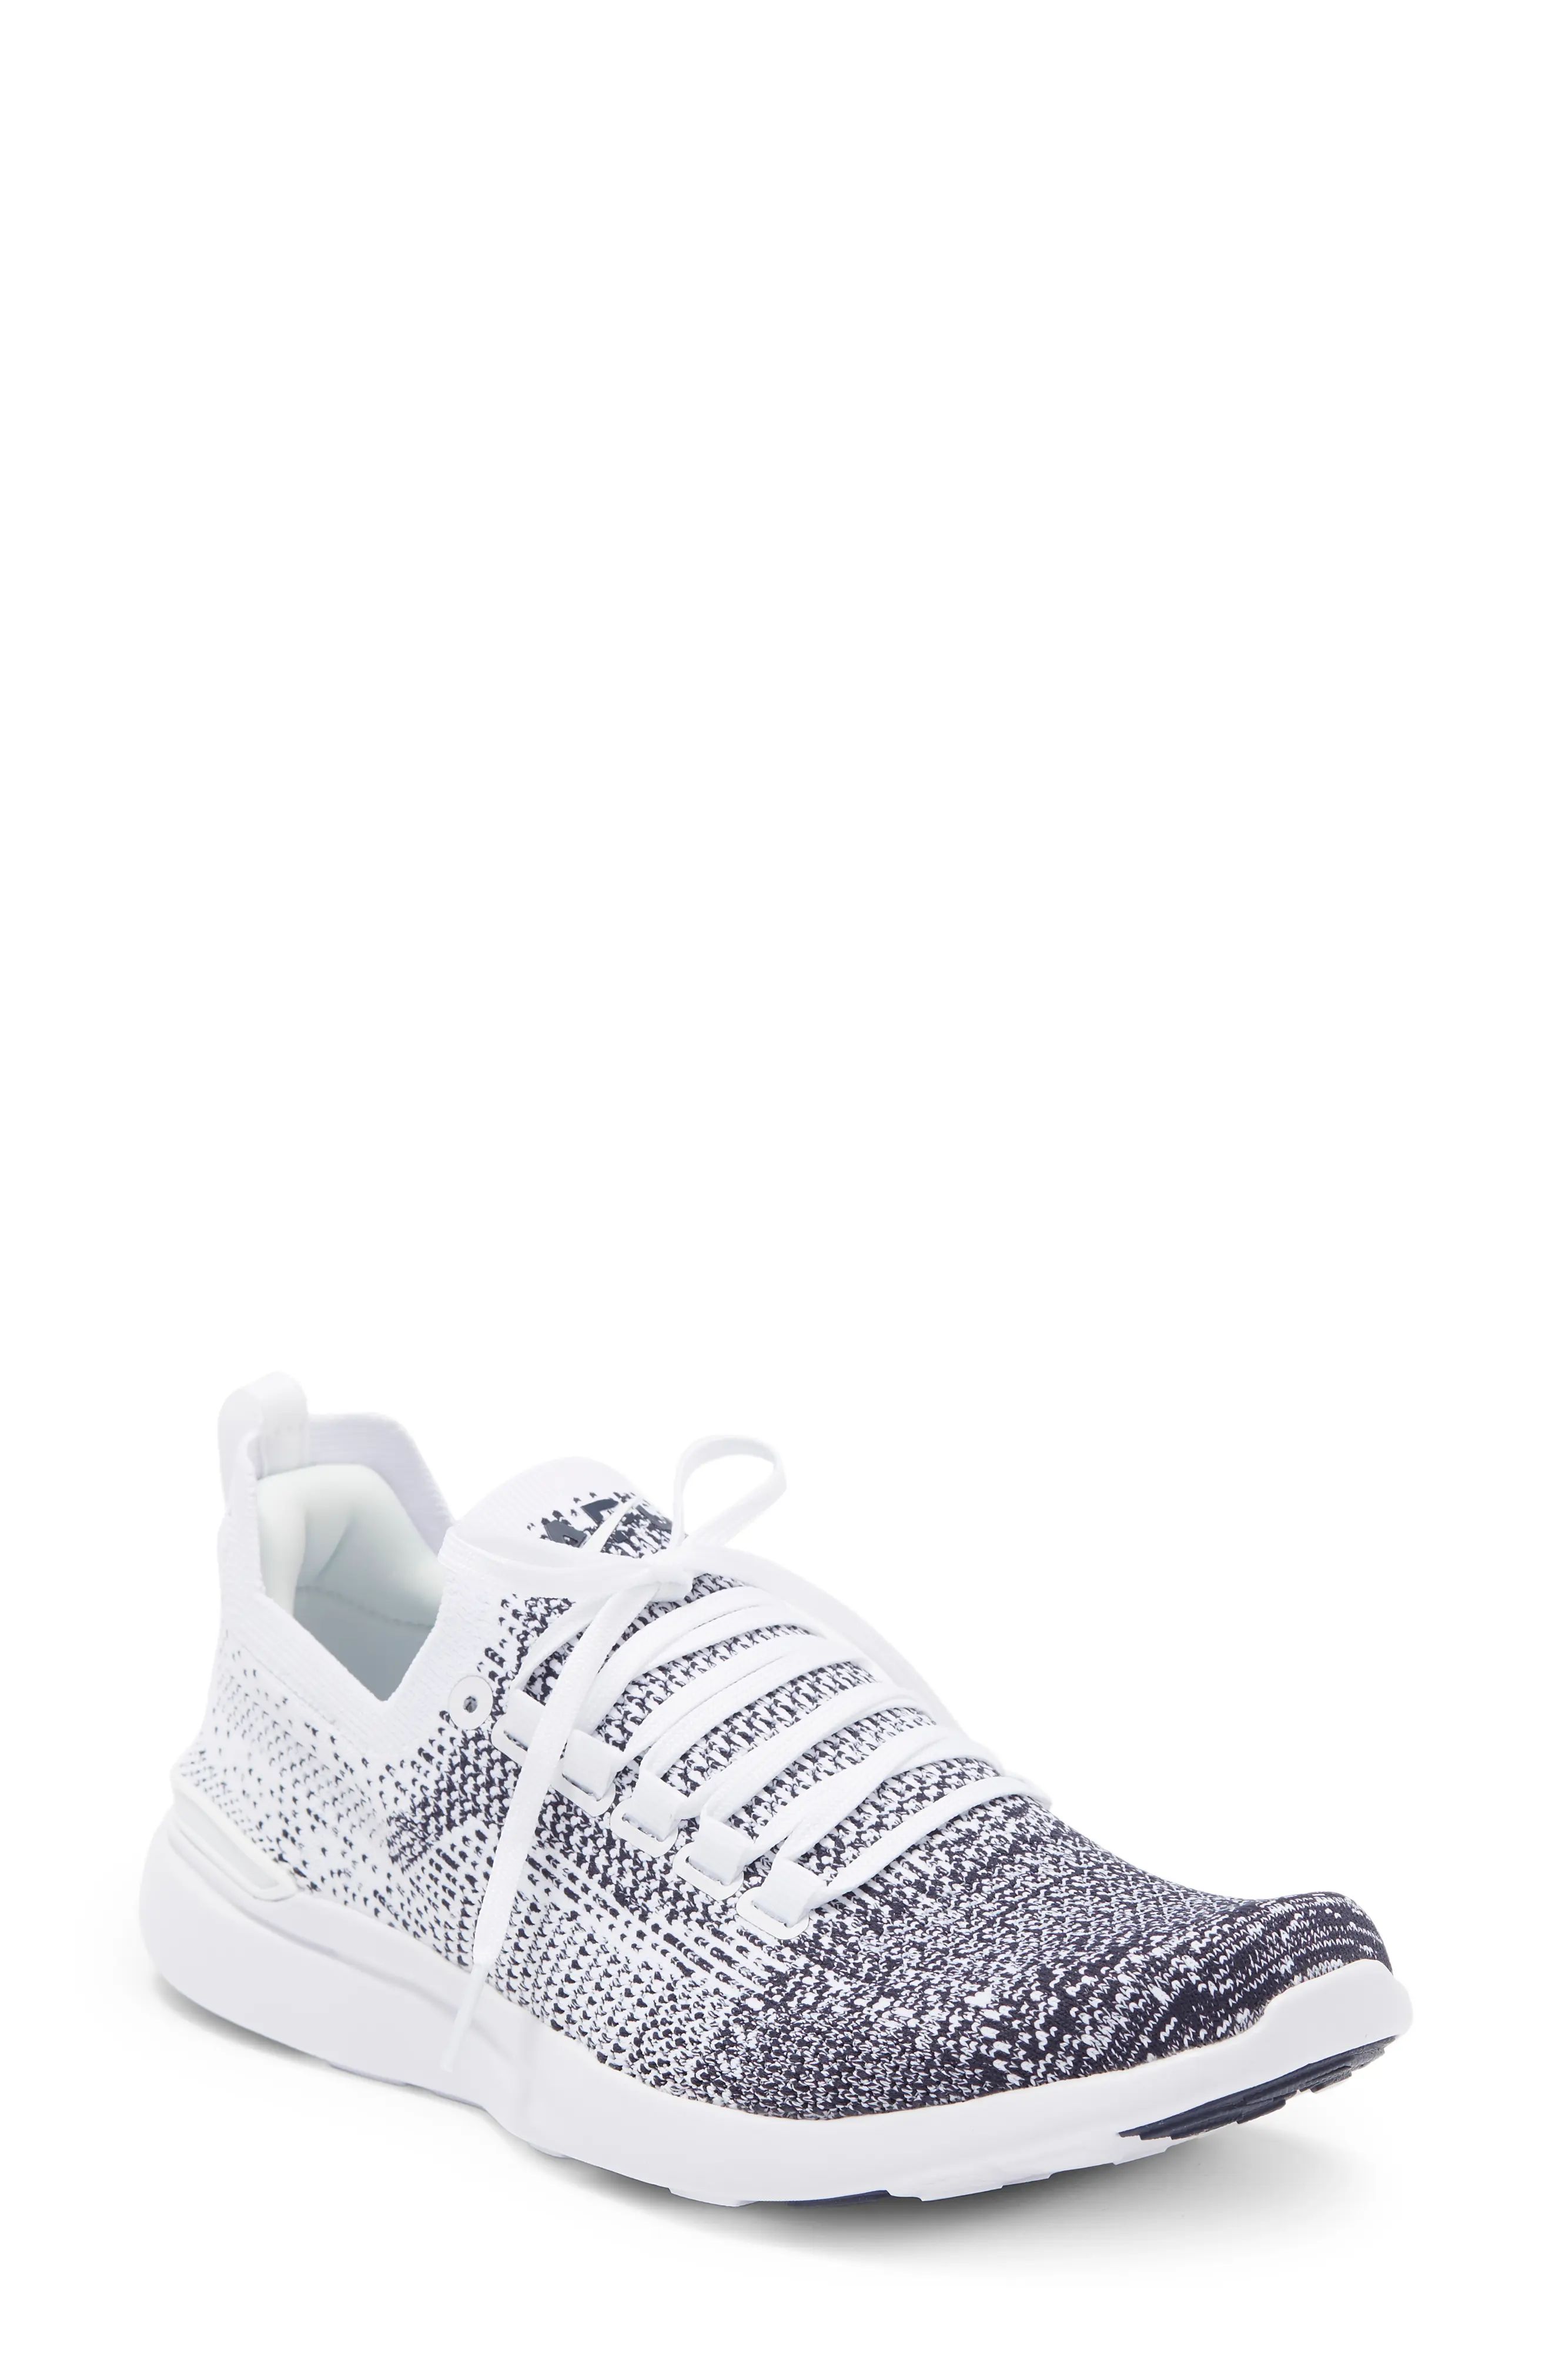 APL TechLoom Breeze Running Shoe in White /Midnight /Ombre at Nordstrom, Size 9 | Nordstrom